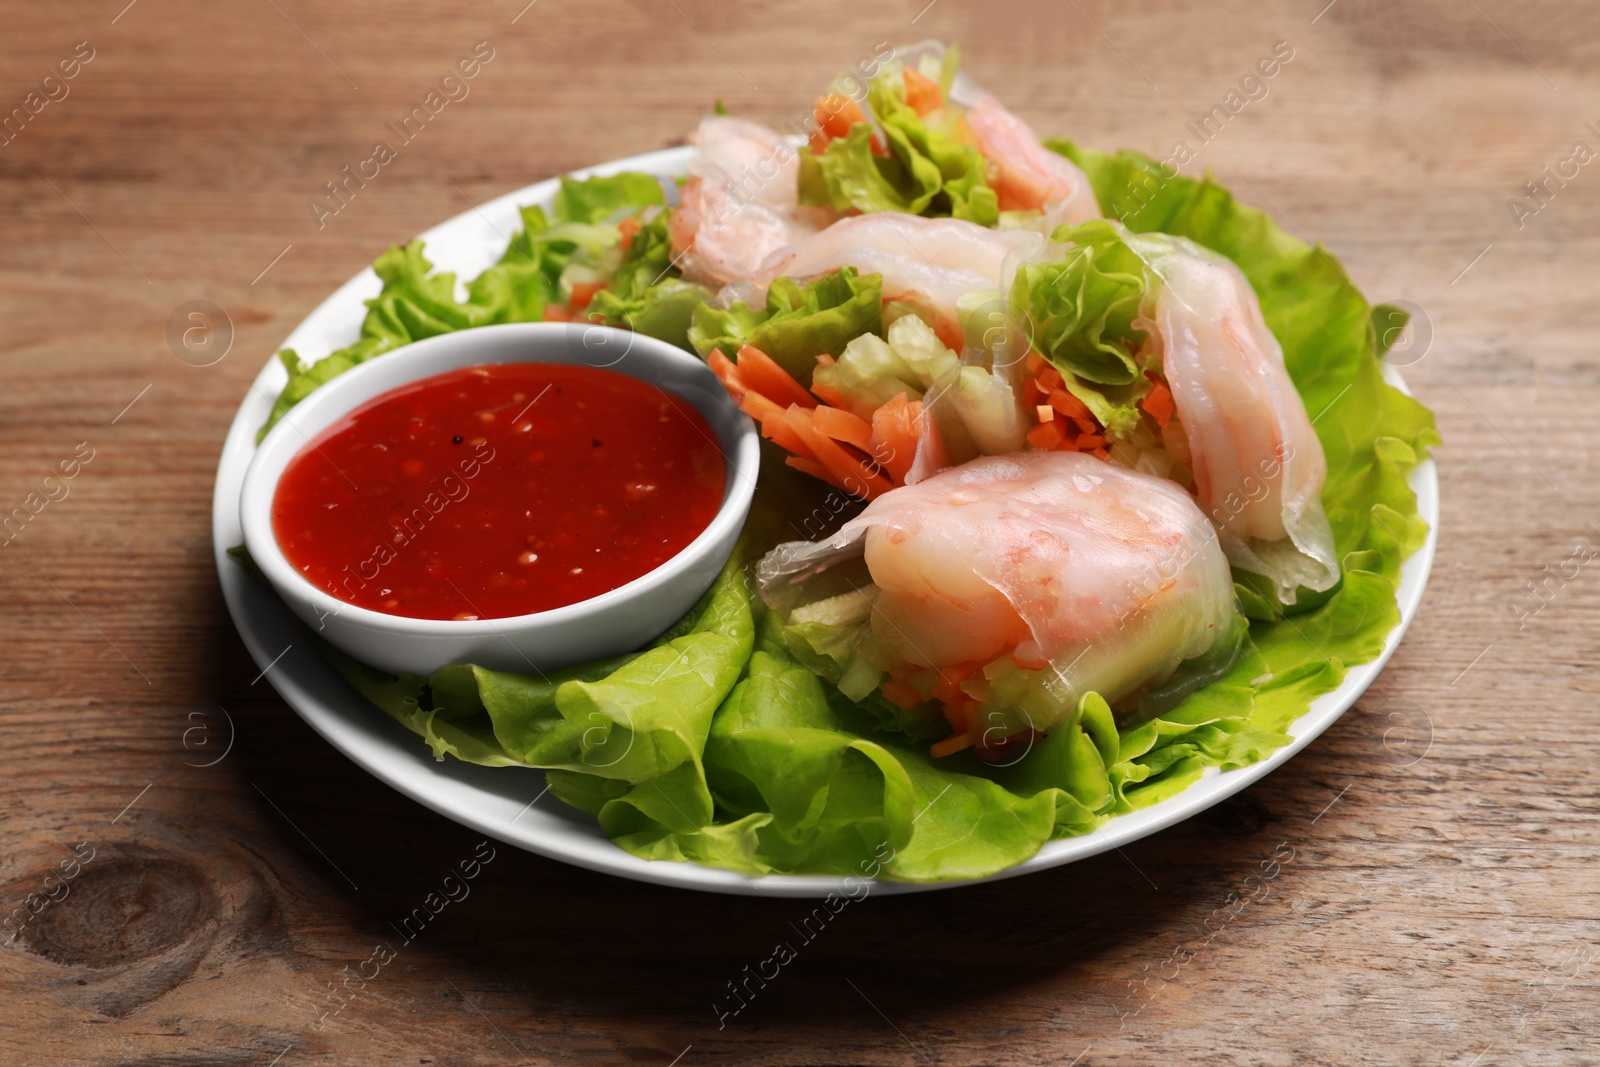 Photo of Tasty spring rolls served with lettuce and sauce on wooden table, closeup